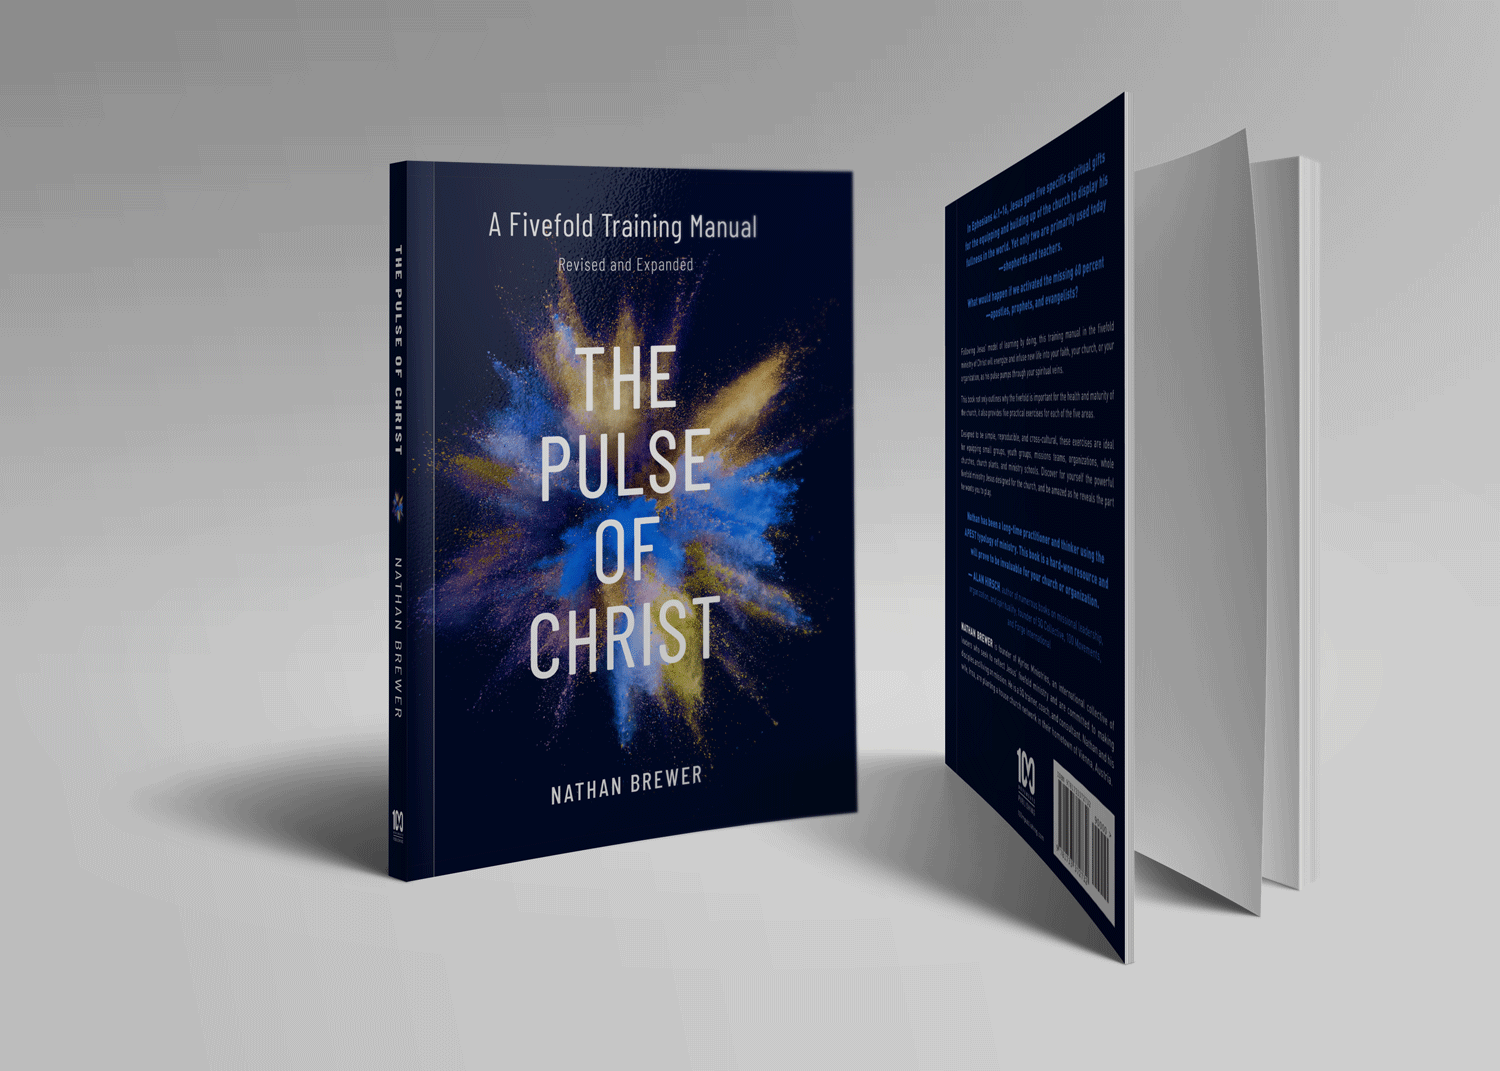 The Pulse of Christ